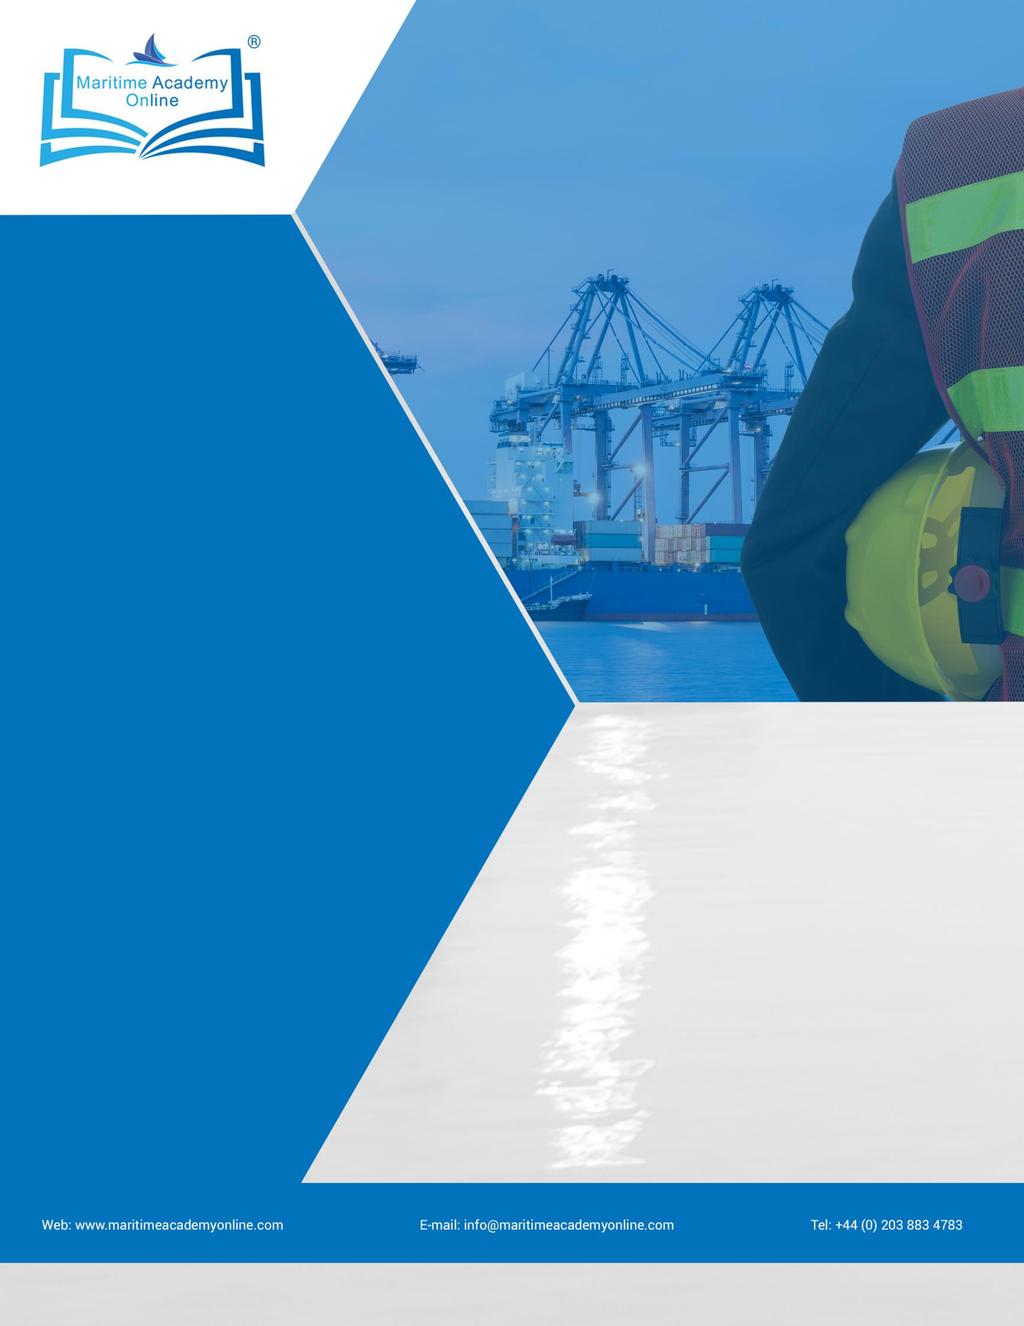 MARITIME ACADEMY ONLINE: Course: IMDG CODE TRAINING MODULE of SHORE- BASED PERSONNEL